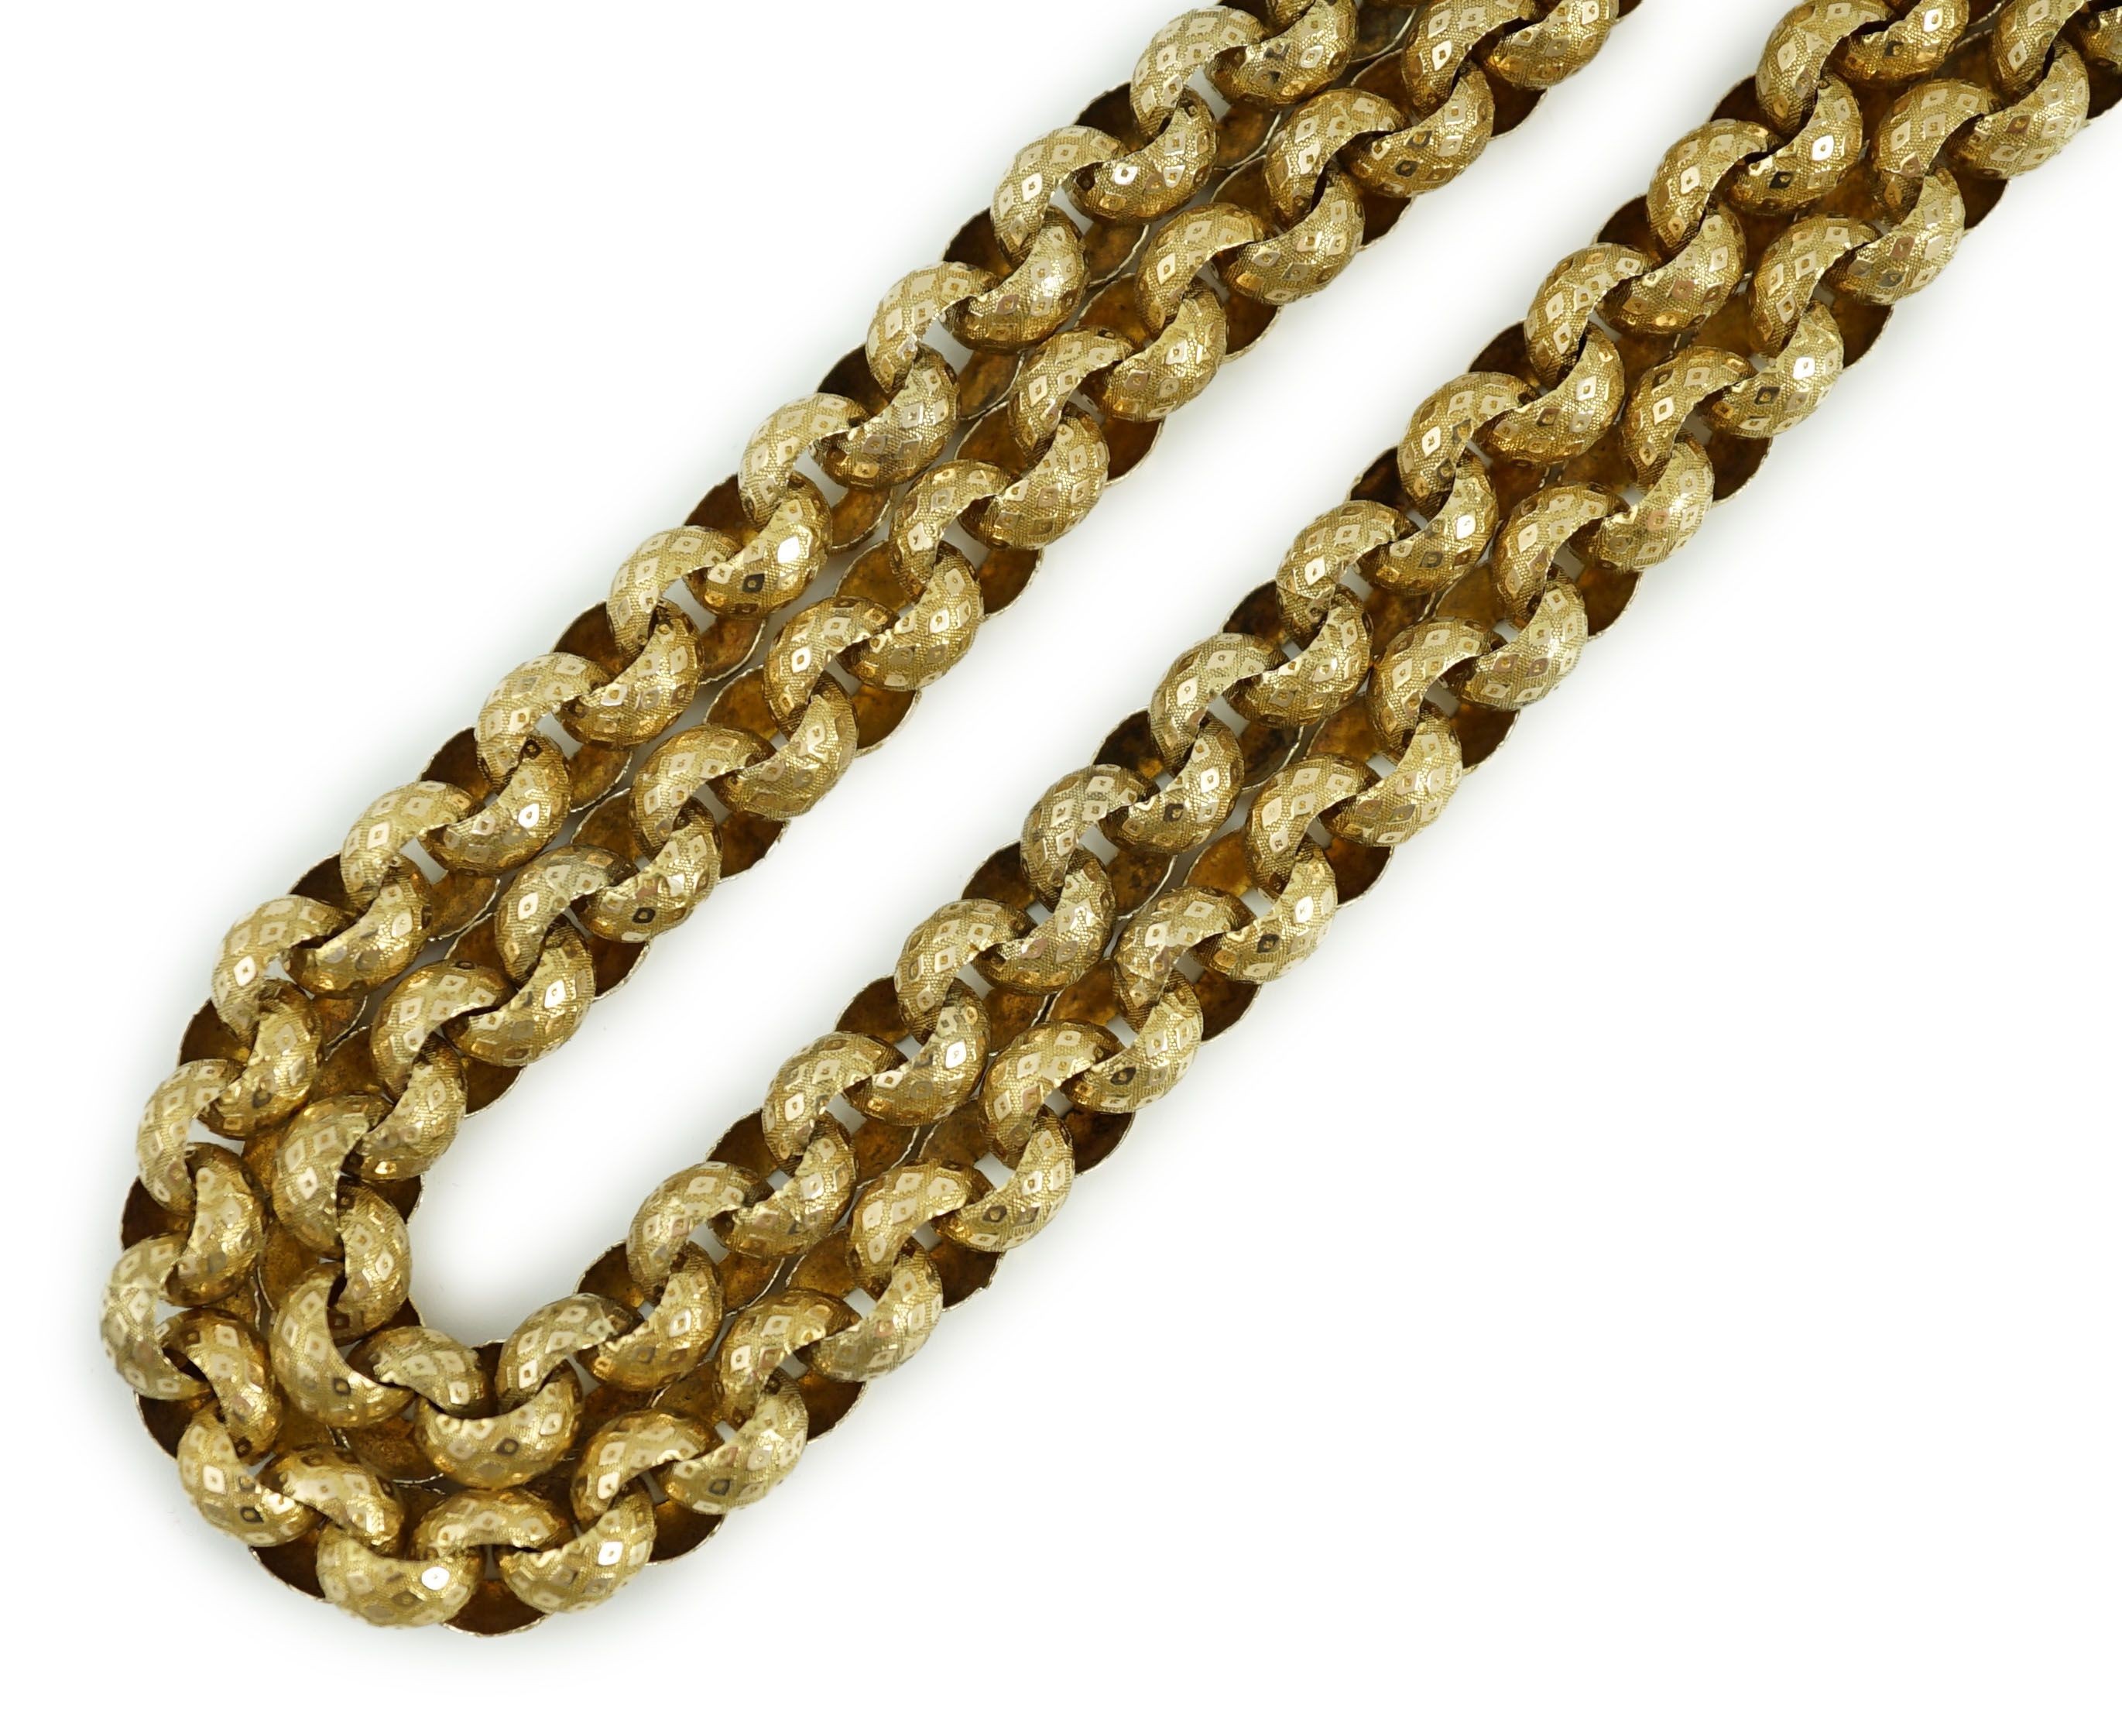 An early 19th century gold muff chain